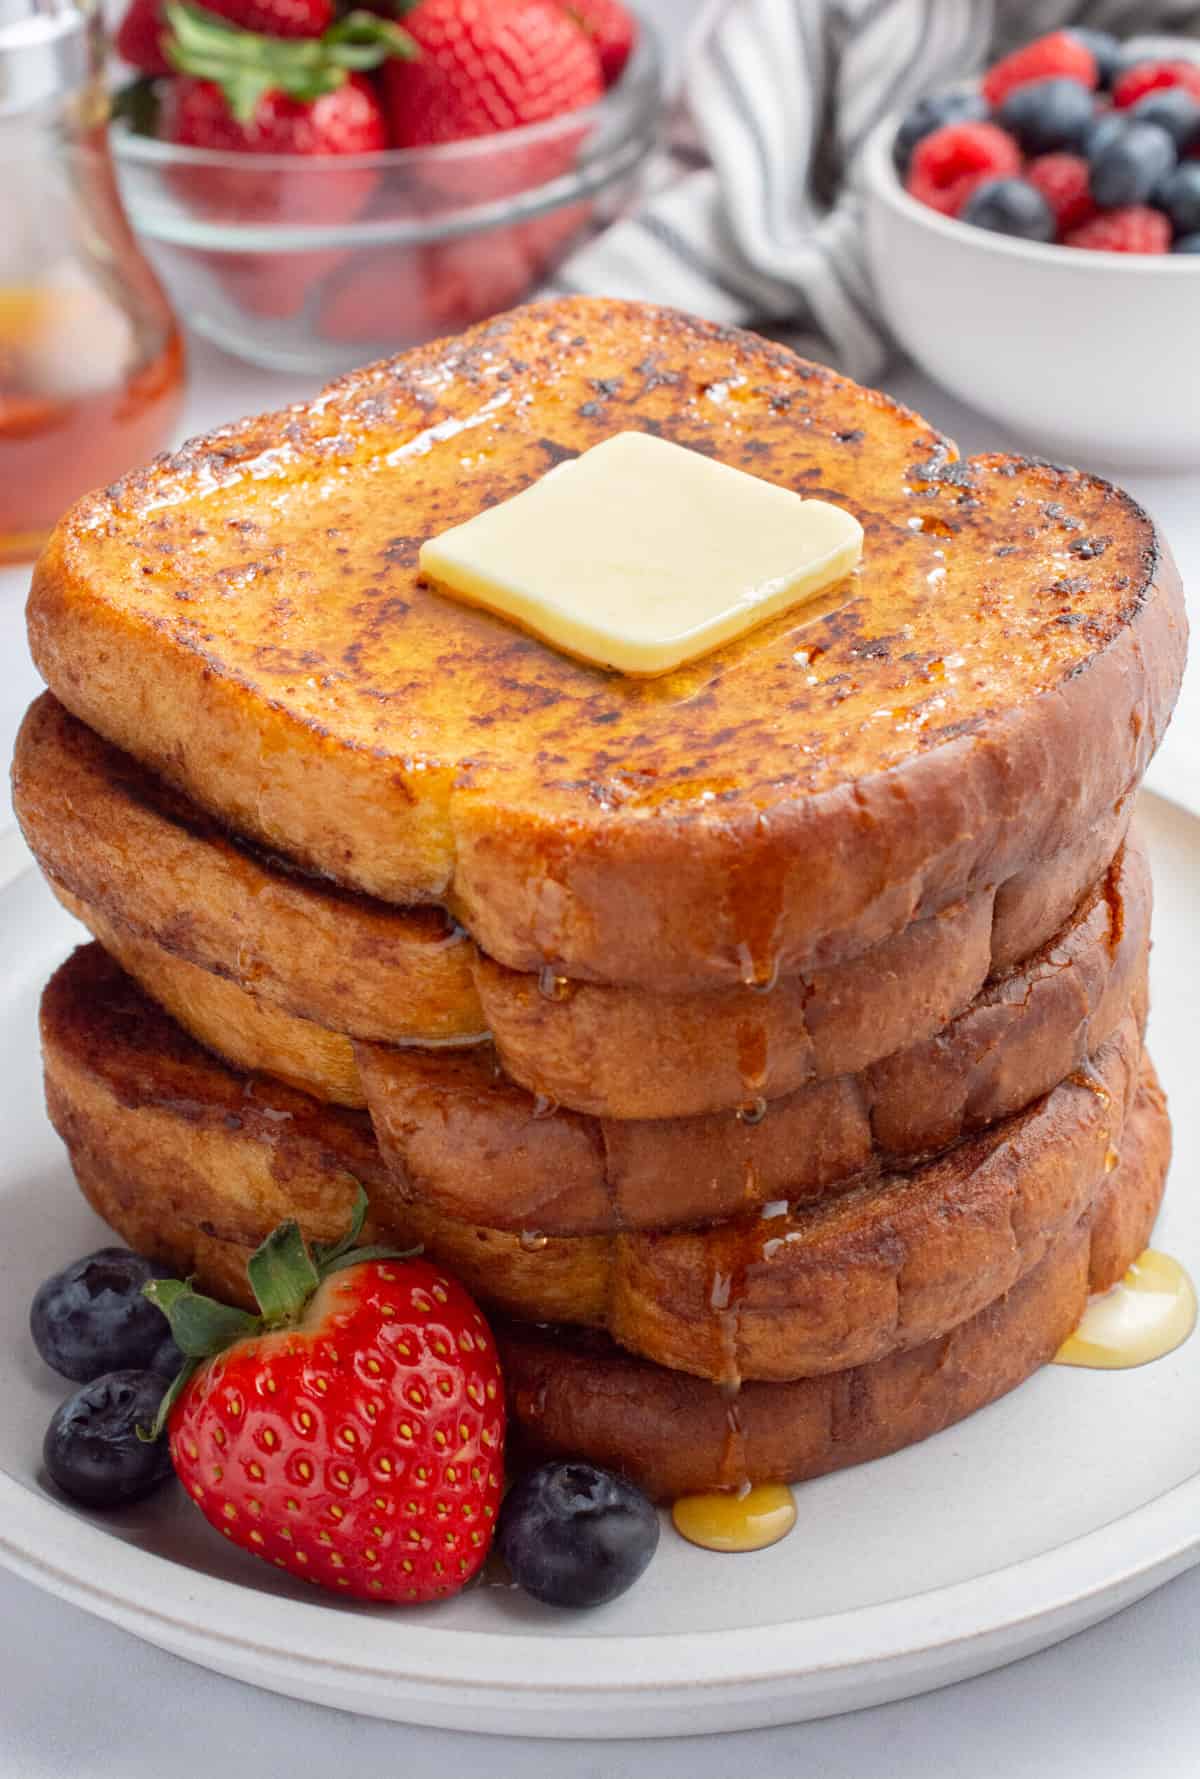 Vegan french toast with maple syrup.